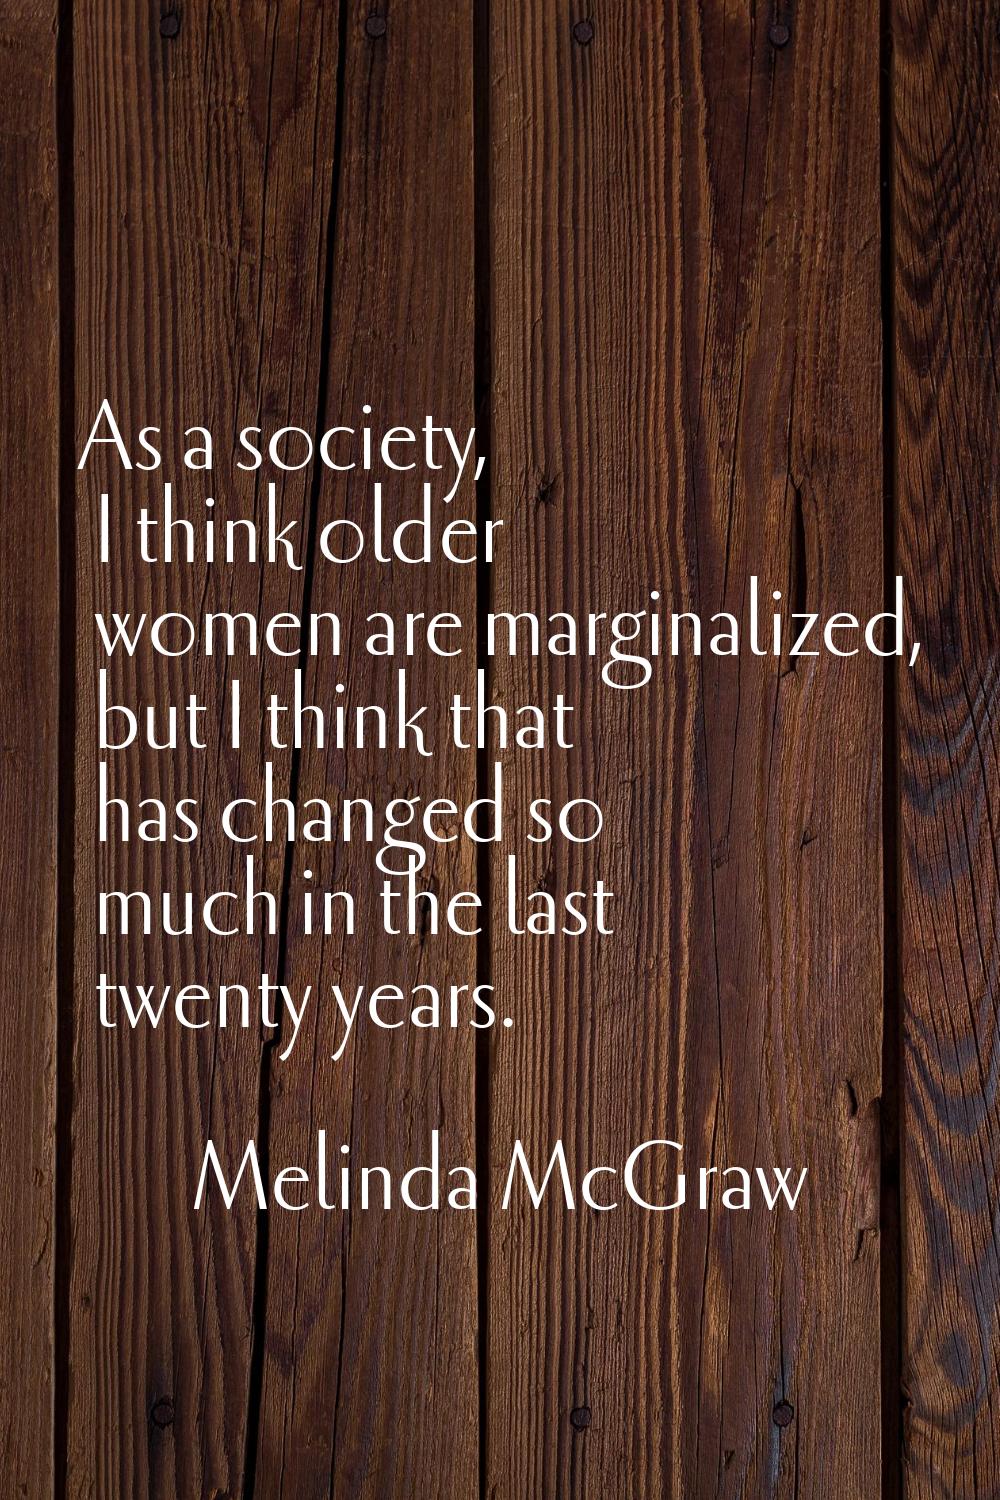 As a society, I think older women are marginalized, but I think that has changed so much in the las